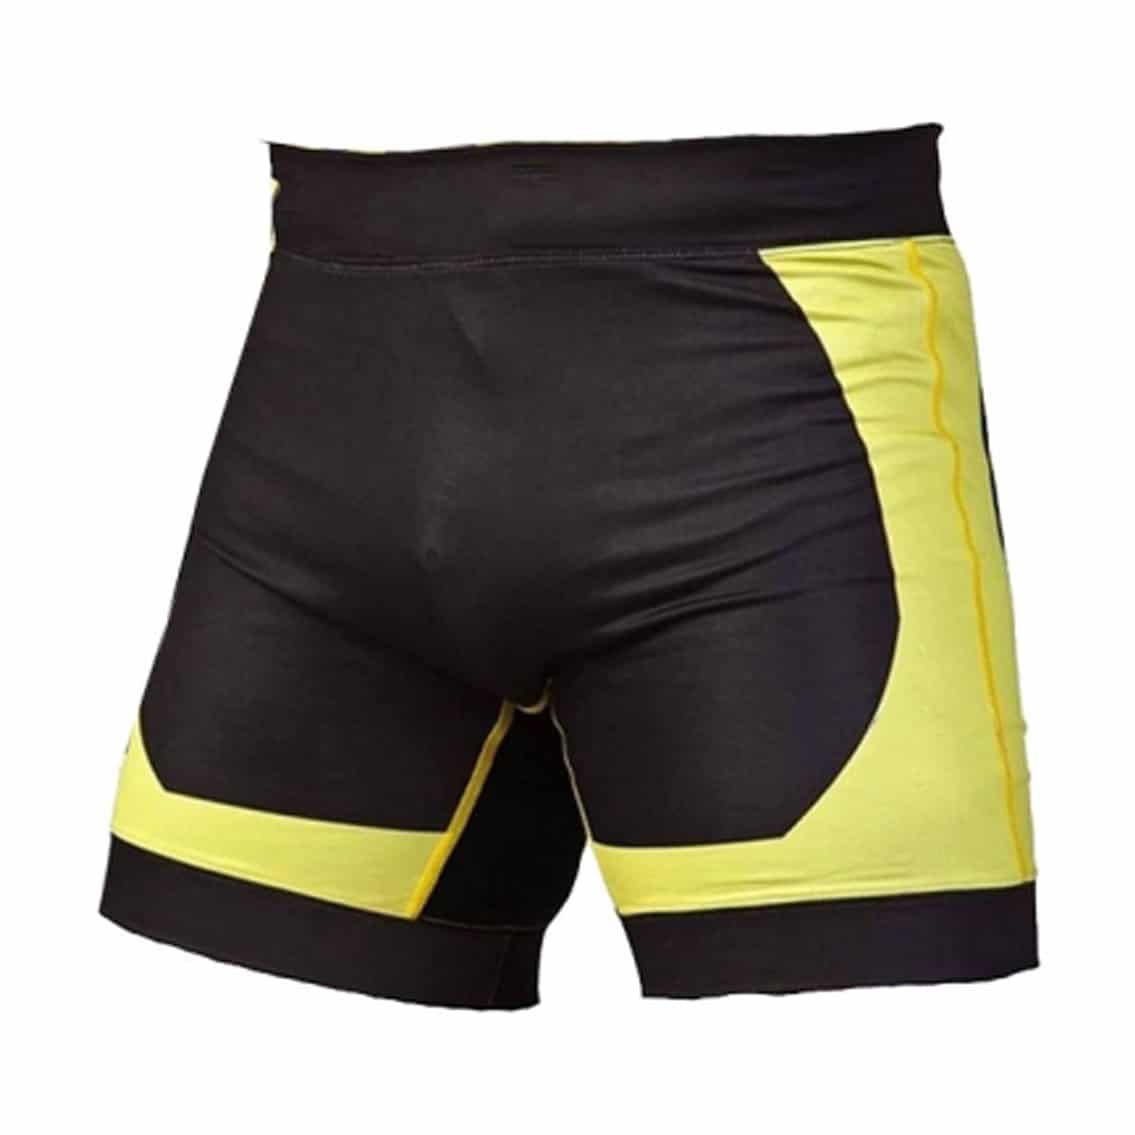 Vale Tudo Shorts - Manufacturing all kind of high quality Sports ...